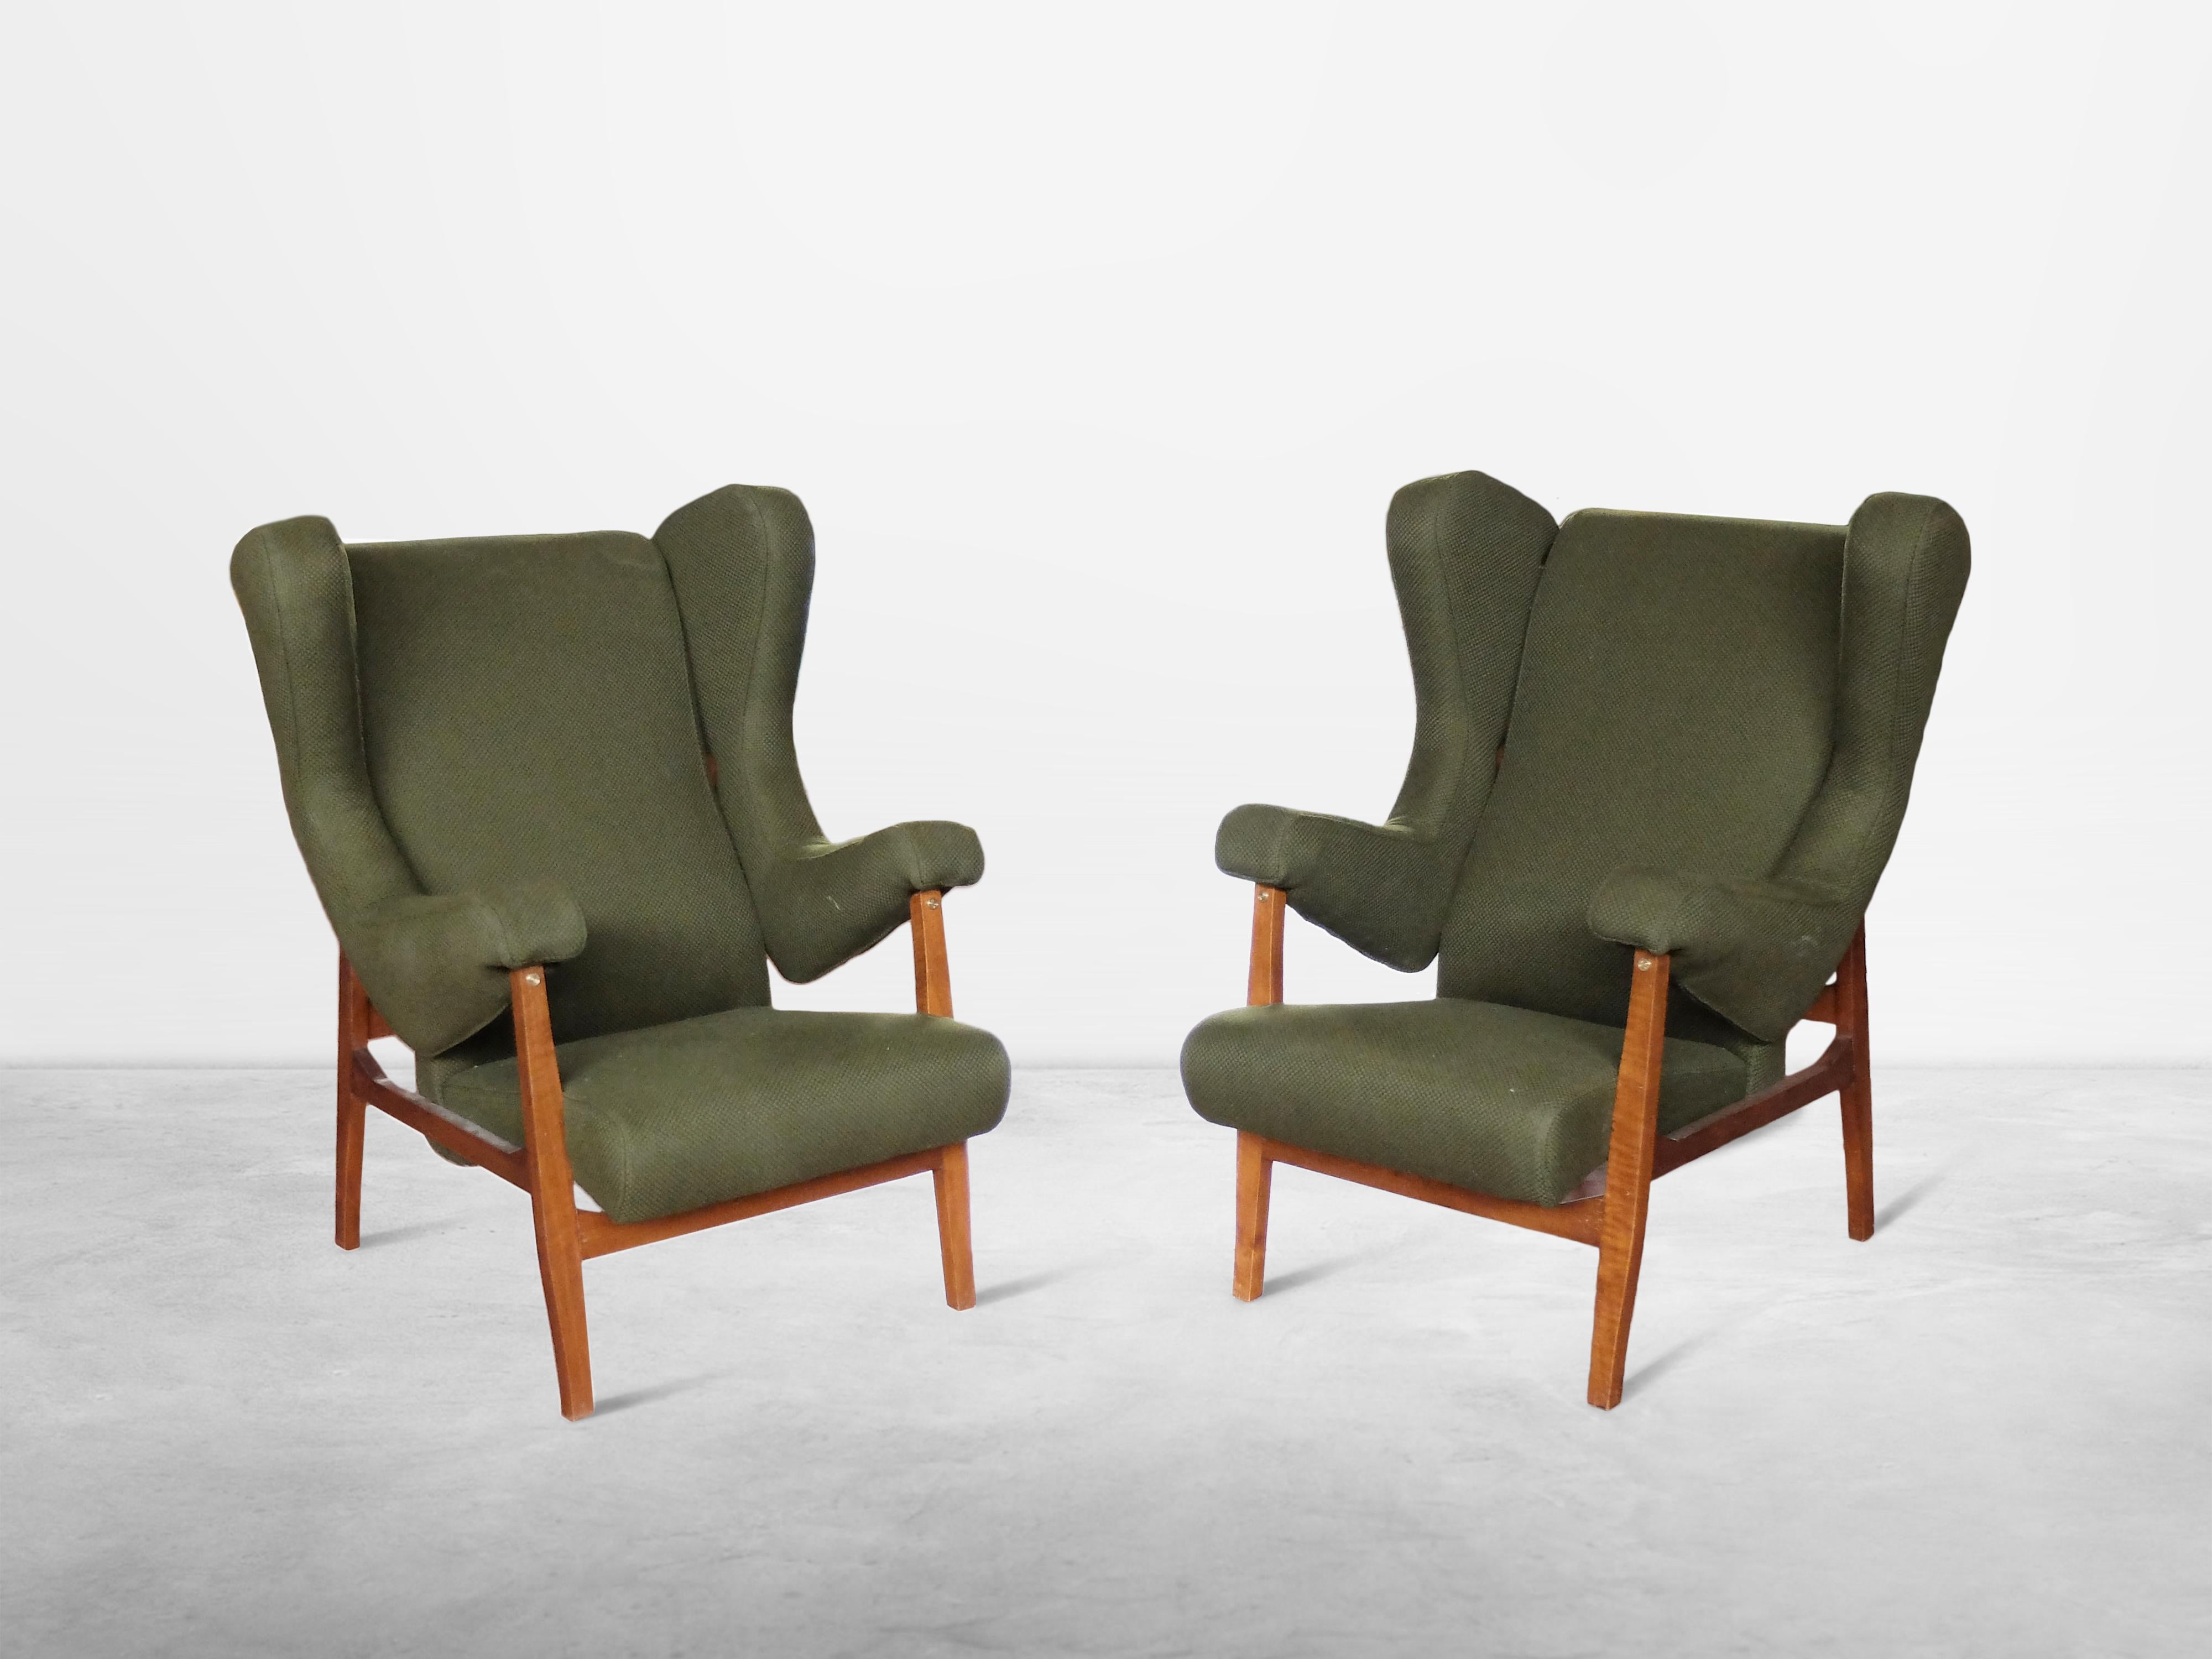 Pair of Iconic Fiorenza armchairs for Arflex, 1953 ca. For Sale at 1stDibs